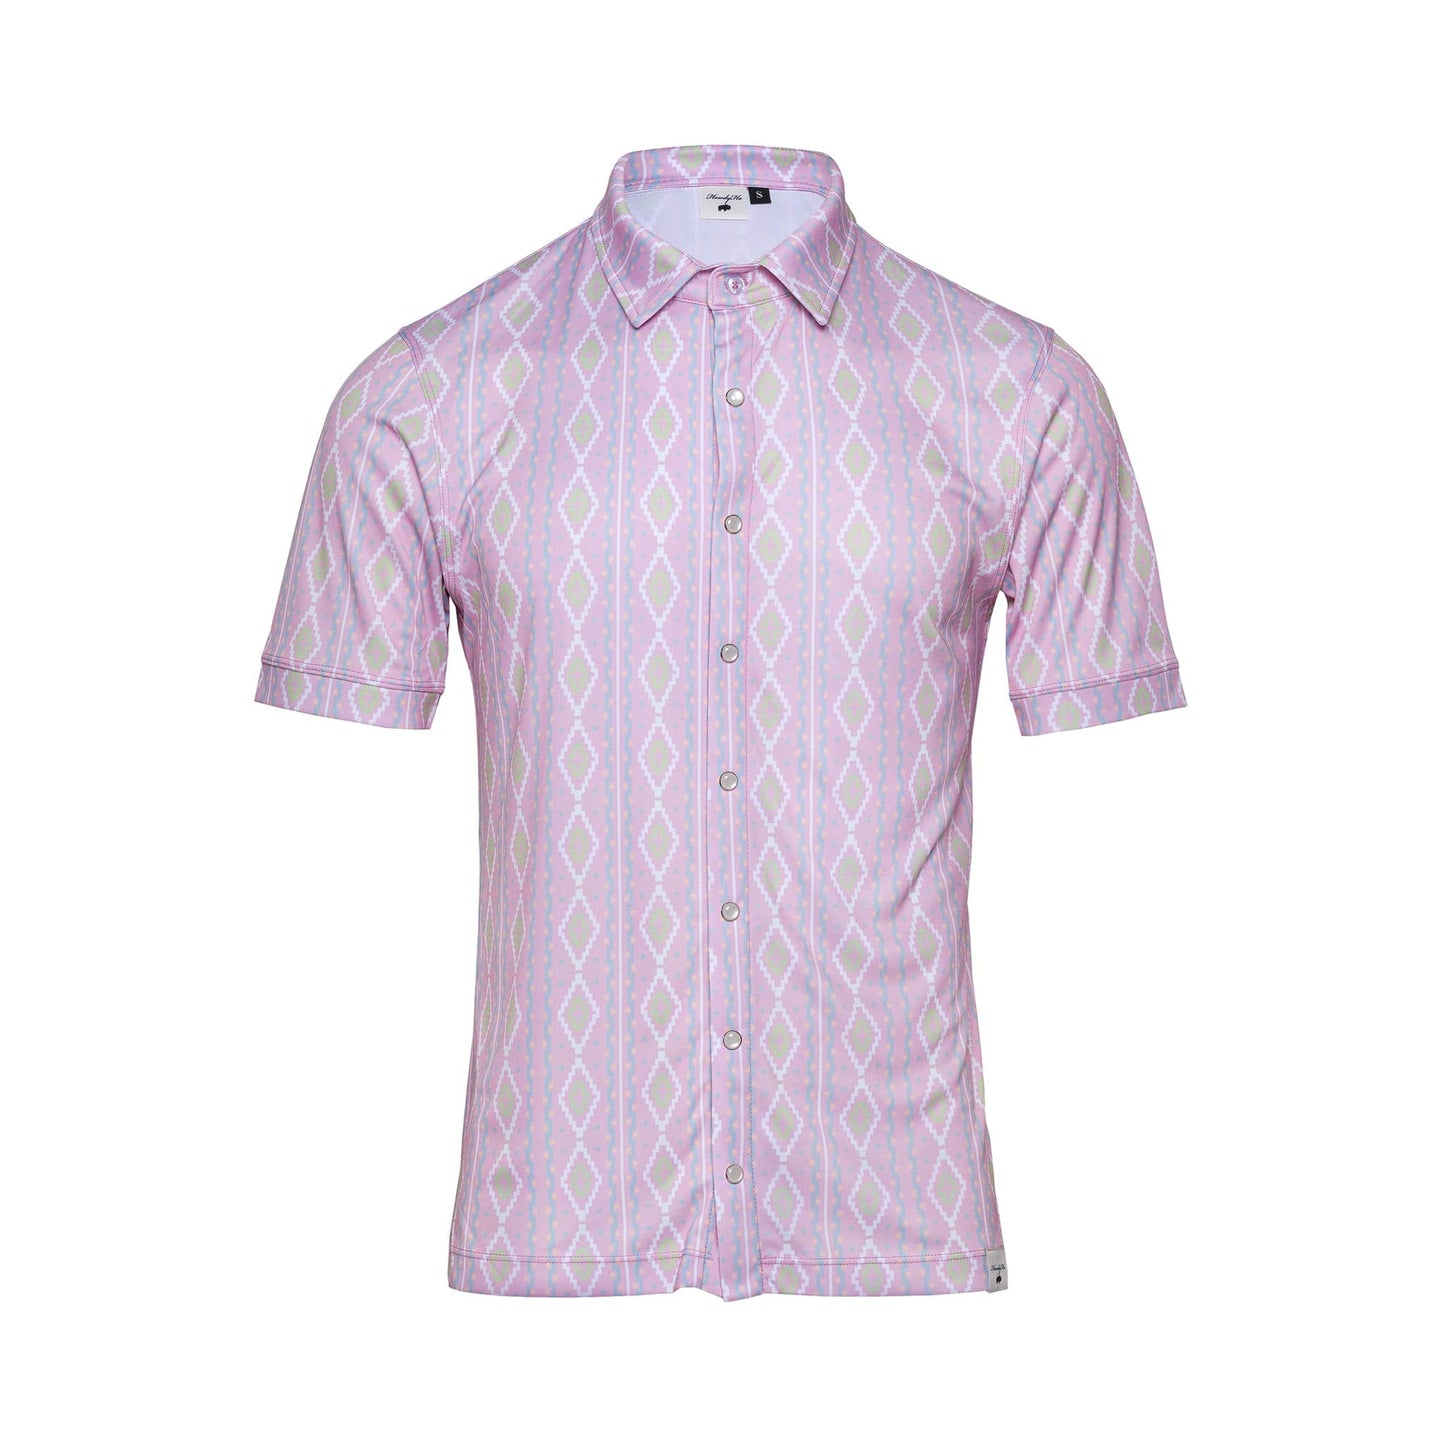 The HowdyHo Rose Quetzal shirt, showcased on a white background, presents a light pink base adorned with unique green and white diamond patterns. This short-sleeved, button-up shirt features a crisp pointed collar and a single pocket, offering a blend of classic style and modern charm.